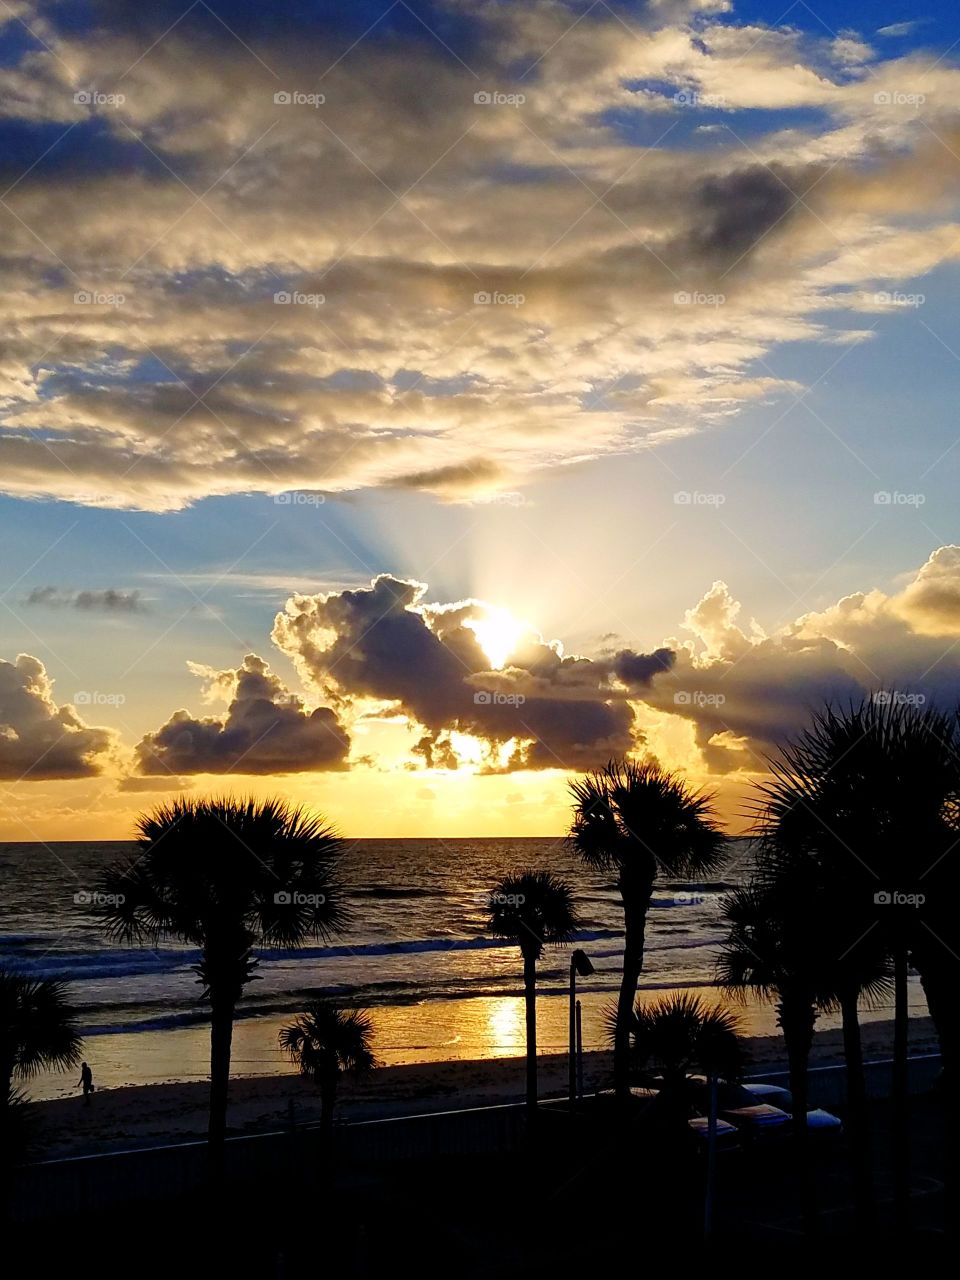 Stunning Florida sunrise in Daytona Beach. Beautiful clouds fill the sky. Palm tree silhouettes in the distance.